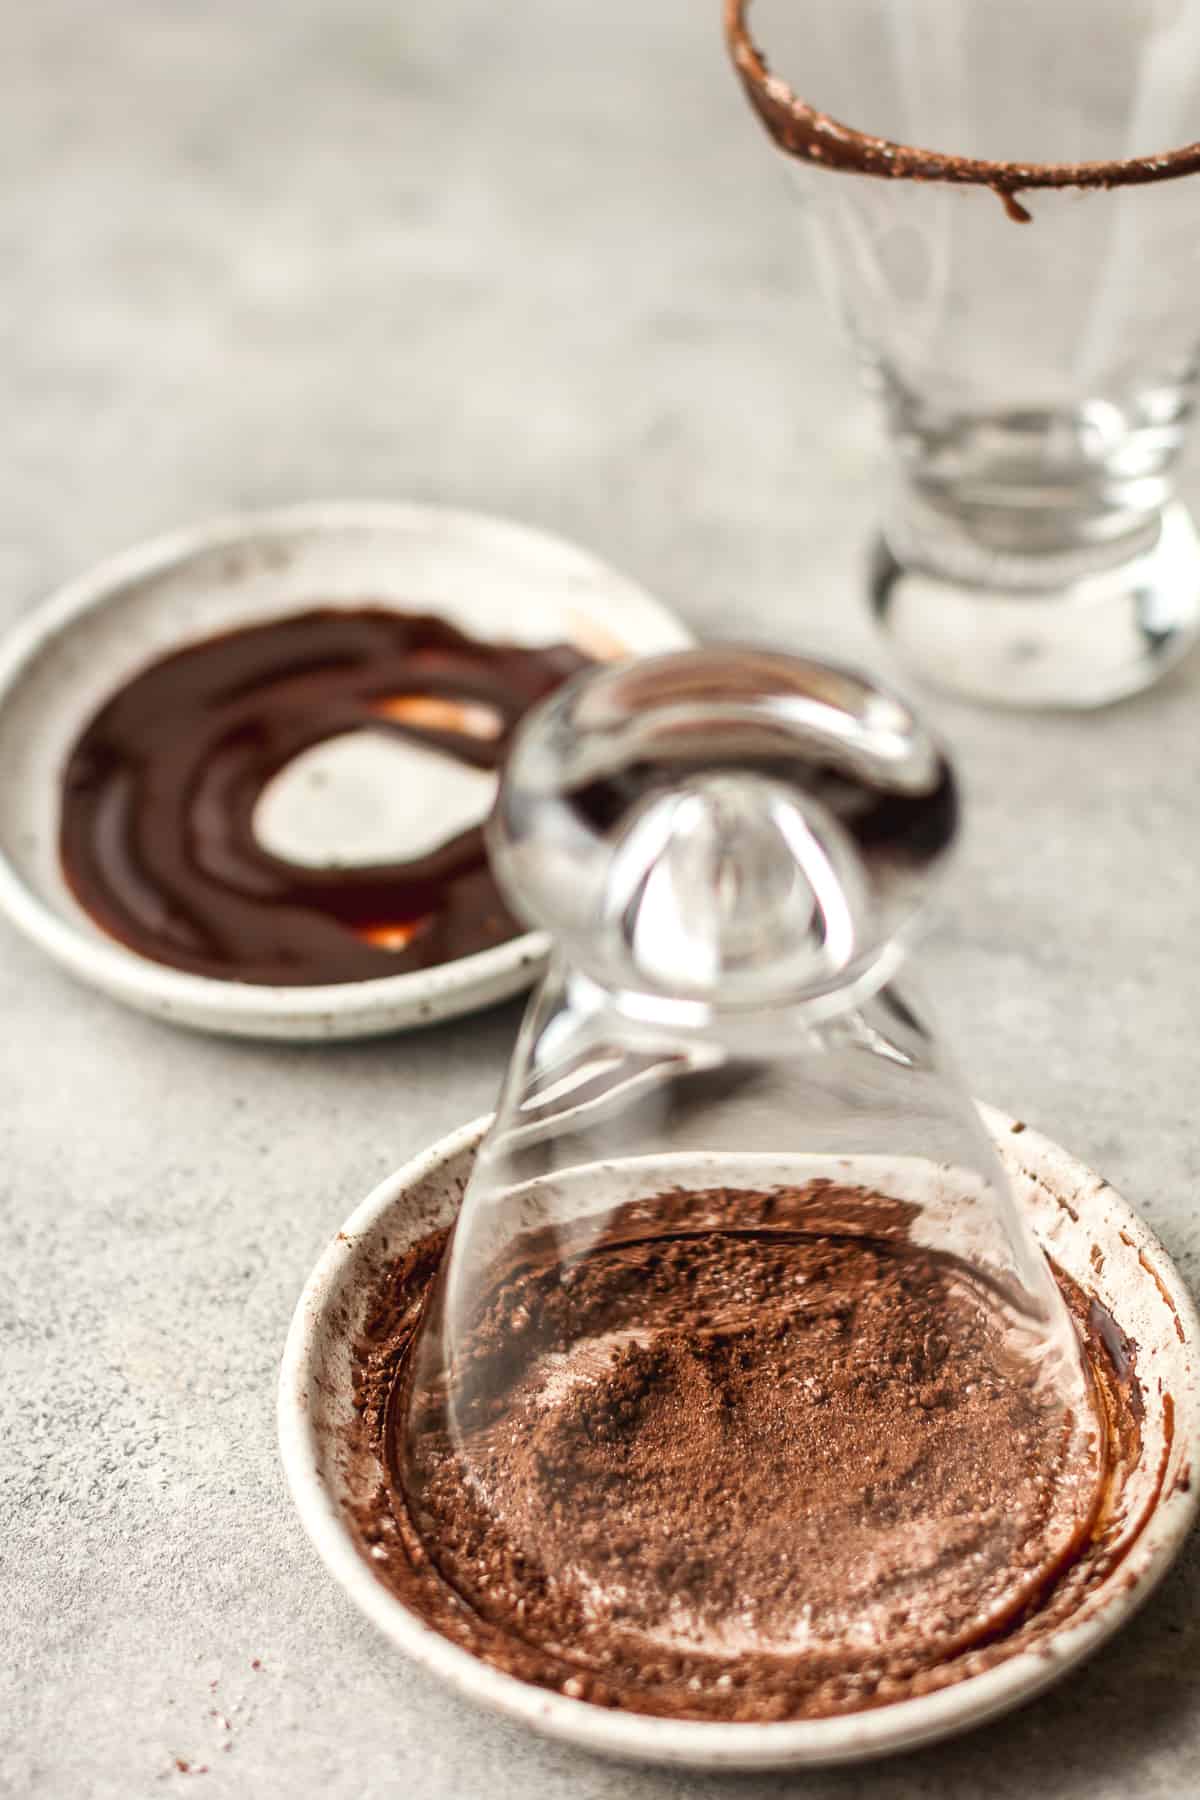 Side view of two glasses, one dipping in a plate of the chocolate.